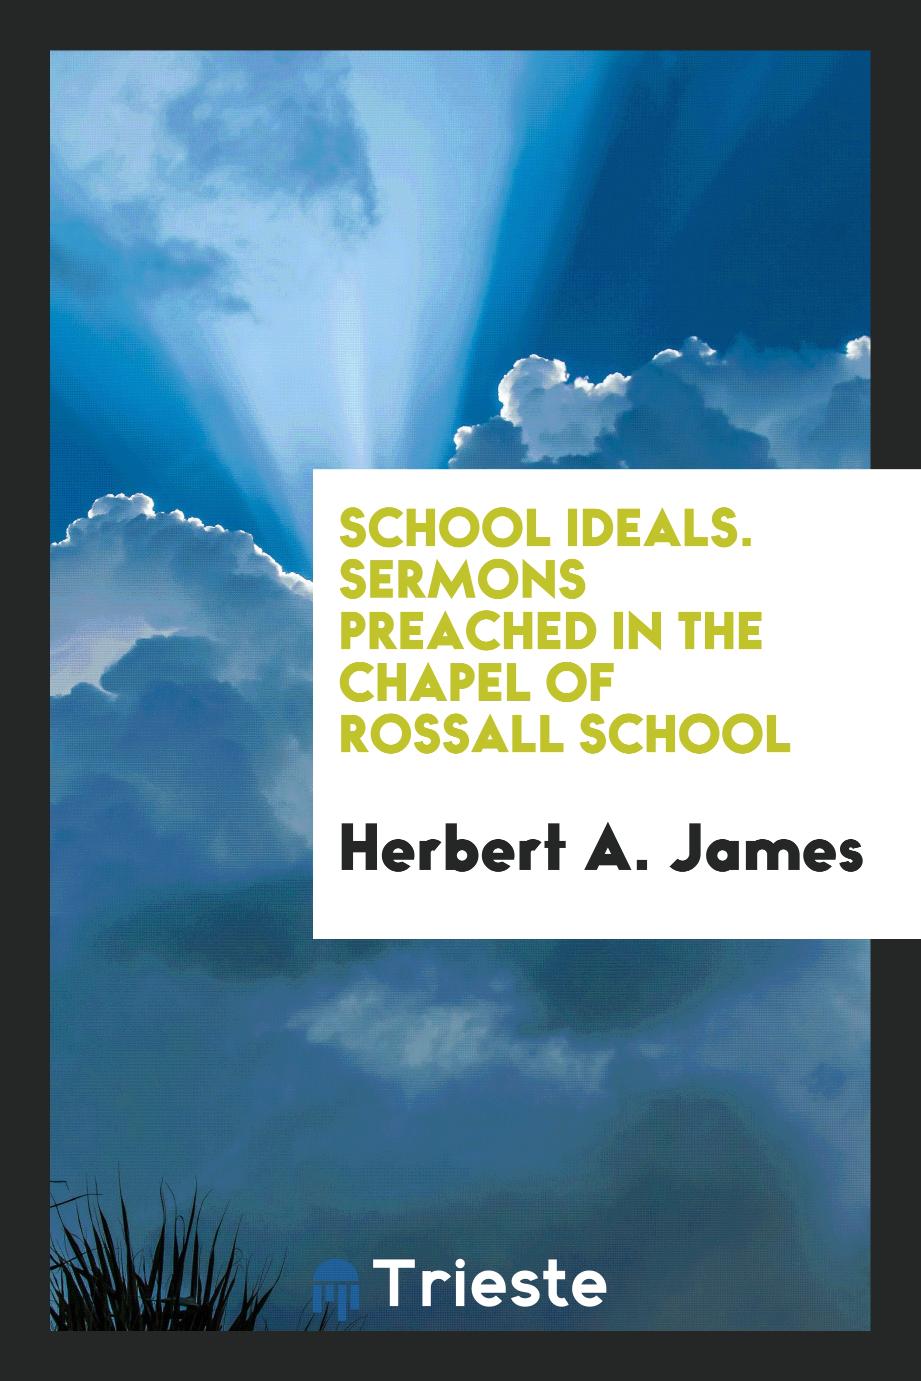 School Ideals. Sermons Preached in the Chapel of Rossall School